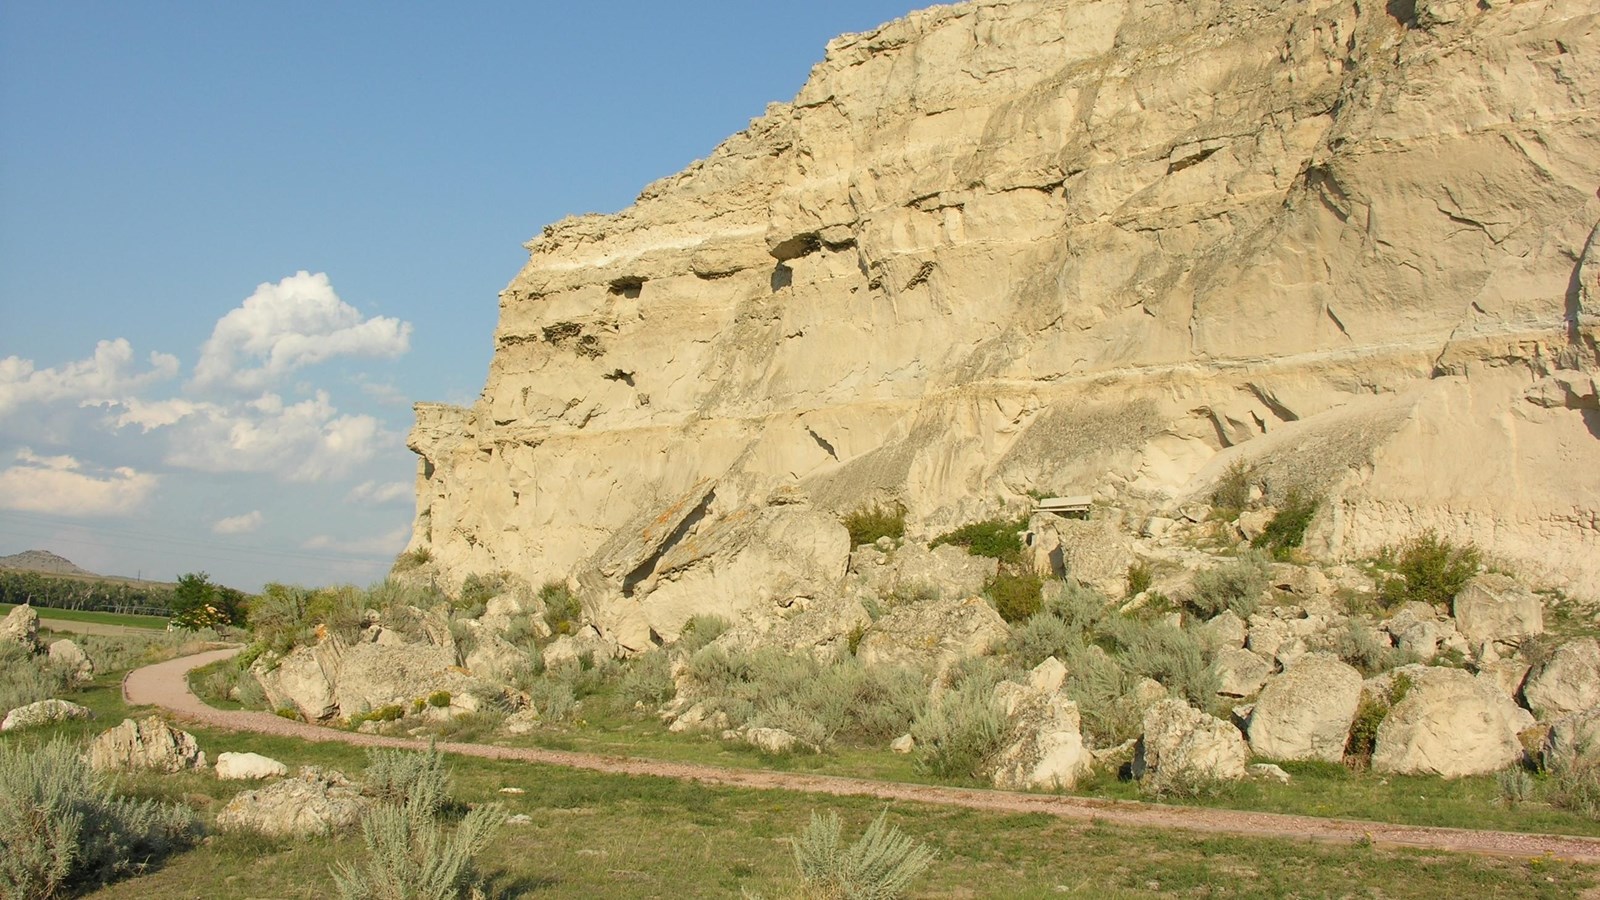 A path hugs close to a large sandstone bluff in a grassy area. Names are etched in the bluff.